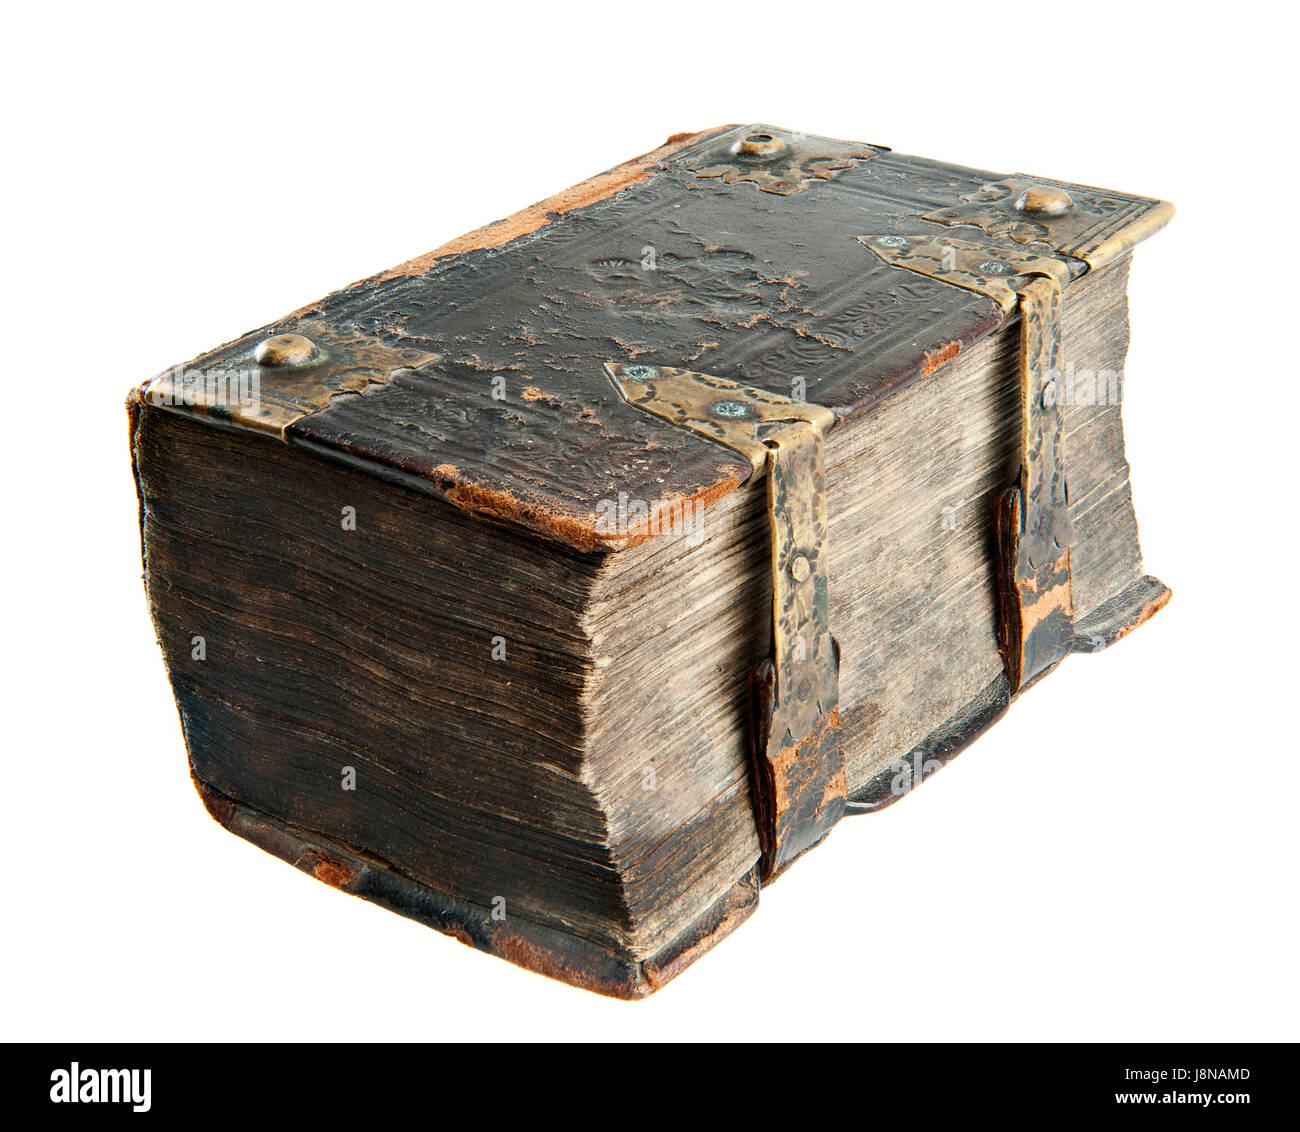 vintage, print, medieval, old, book, object, education, single, religion  Stock Photo - Alamy